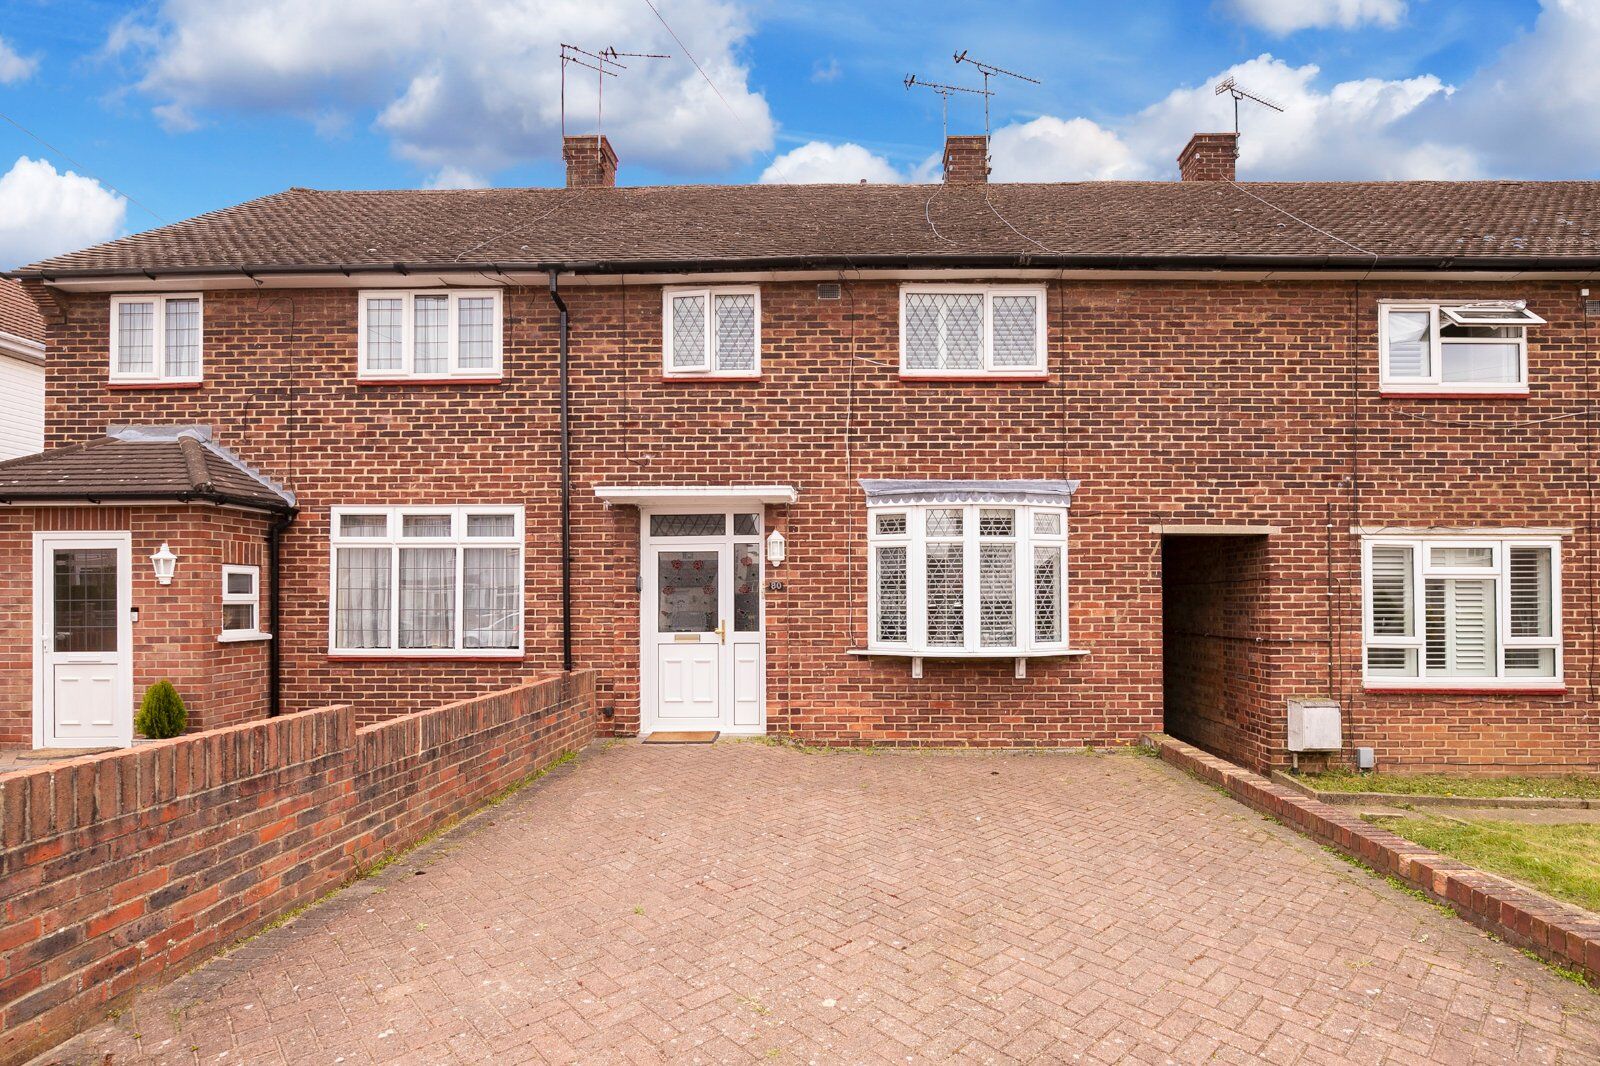 2 bedroom mid terraced house for sale Colebrook Lane, Loughton, IG10, main image